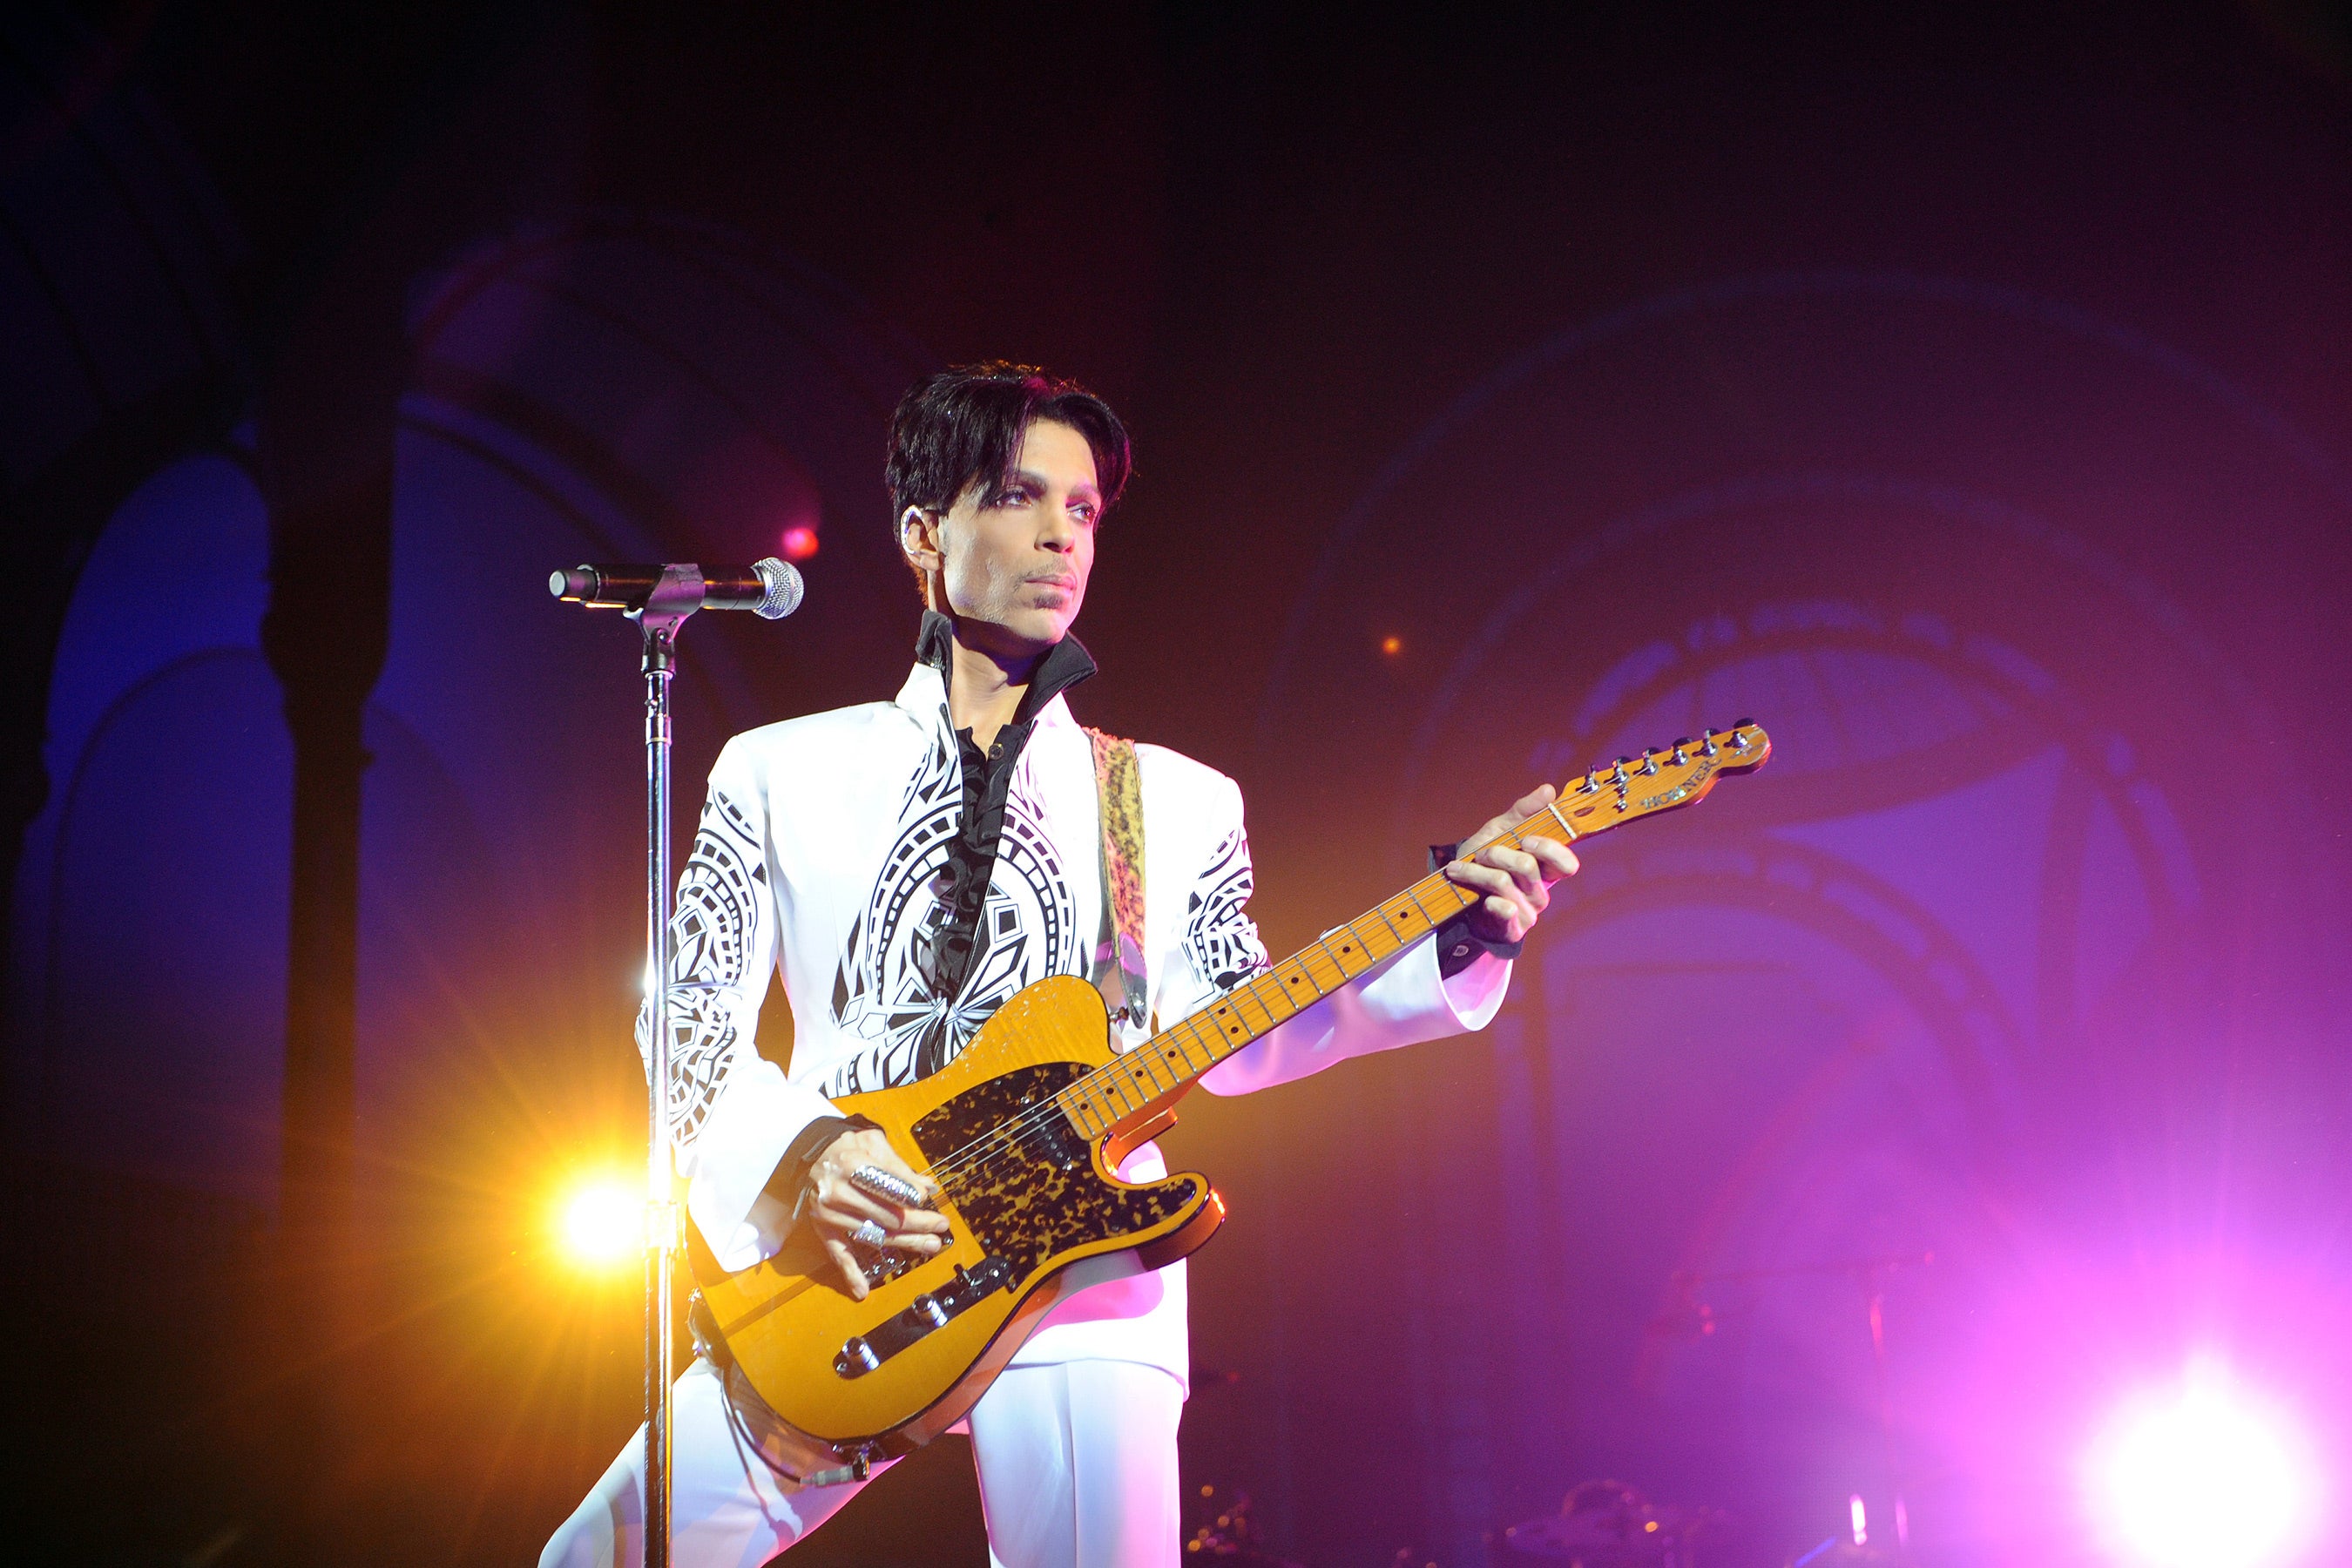 Prince Died After Taking Counterfeit Vicodin Pills Laced With Fentanyl
